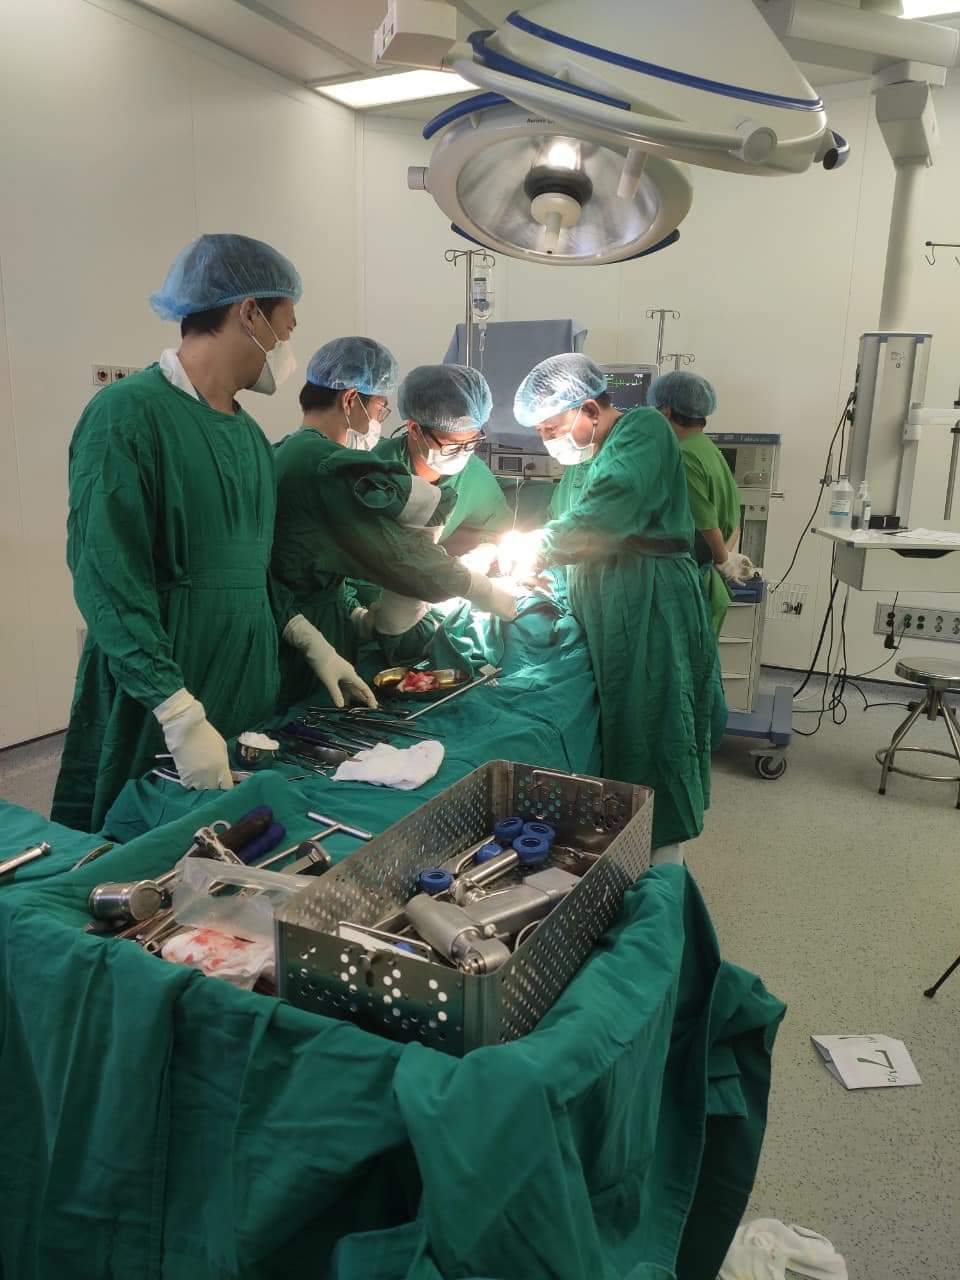 A group of surgeons in a operating room
Description automatically generated with low confidence